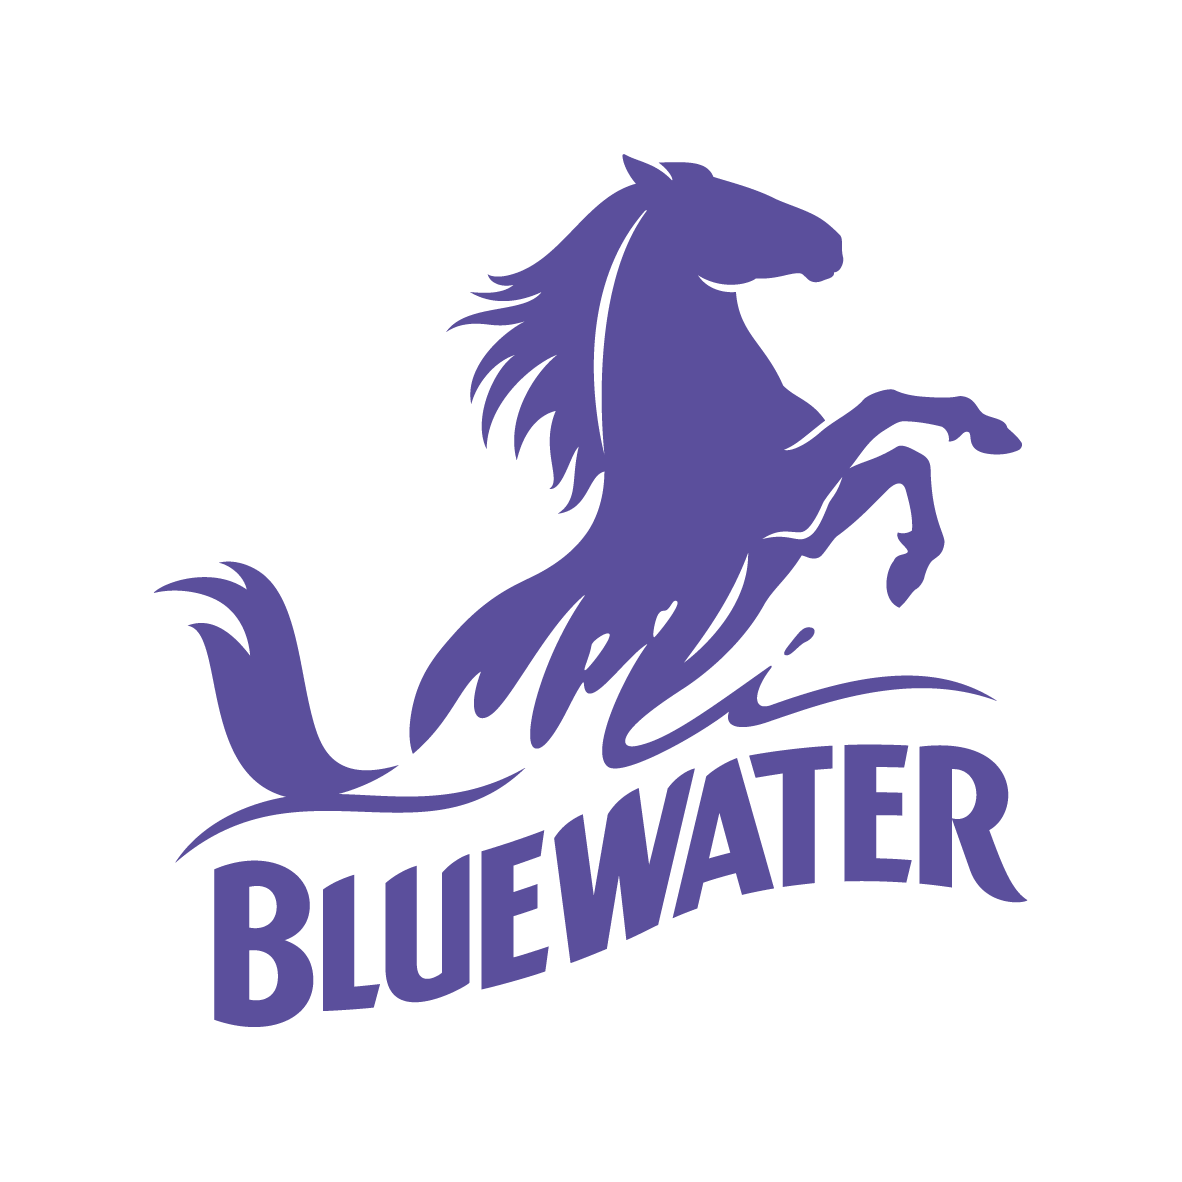 www.bluewater.co.uk